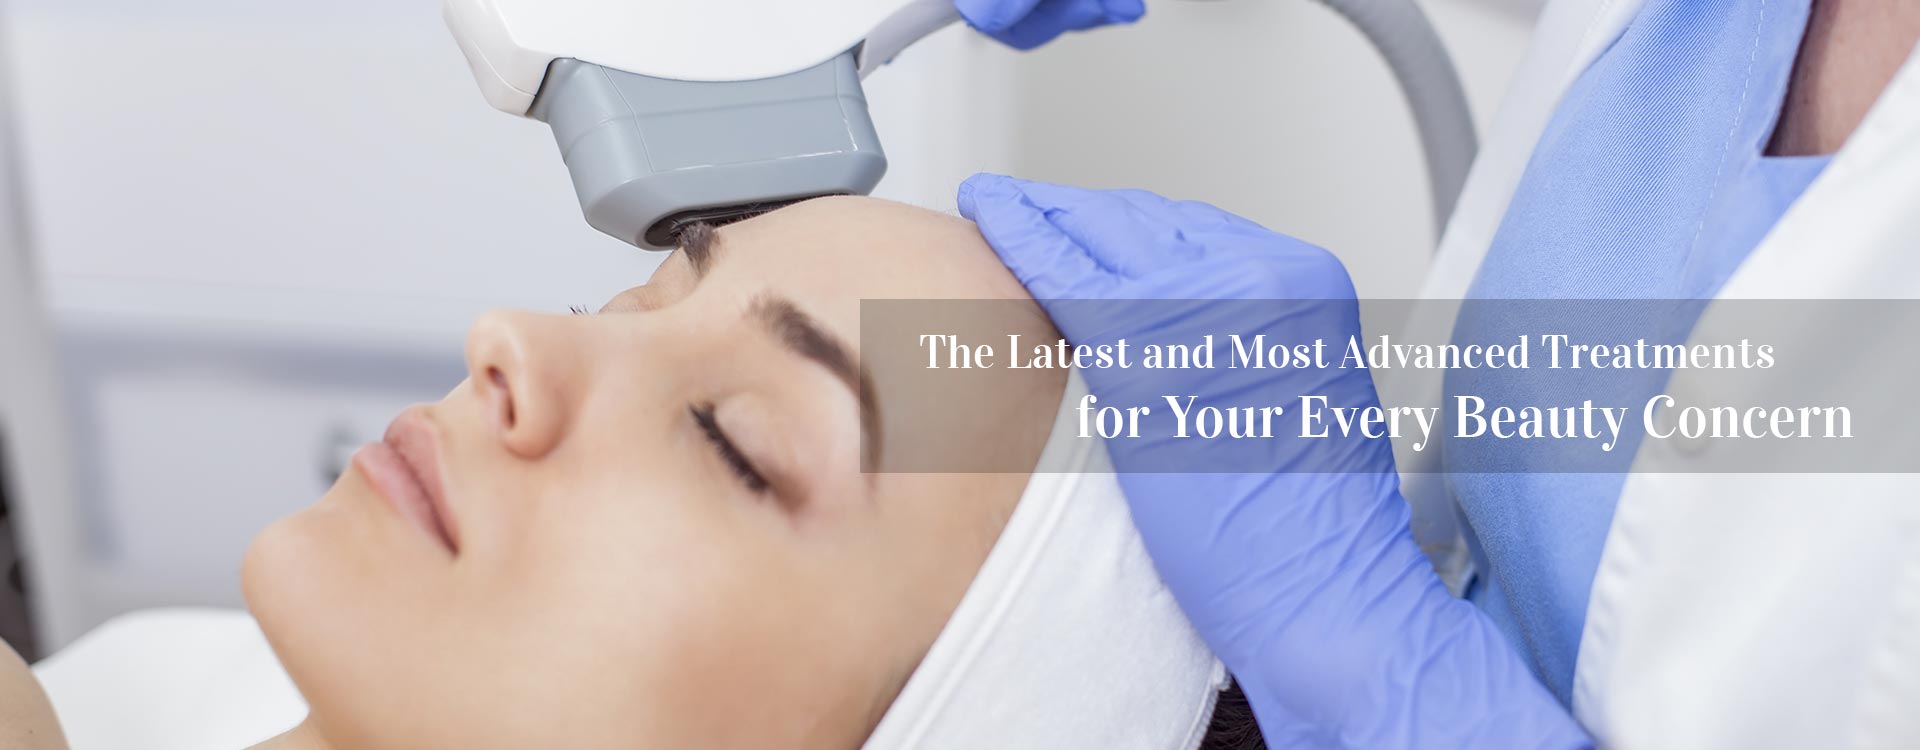 Best Anti Aging Treatments for Face in Noida